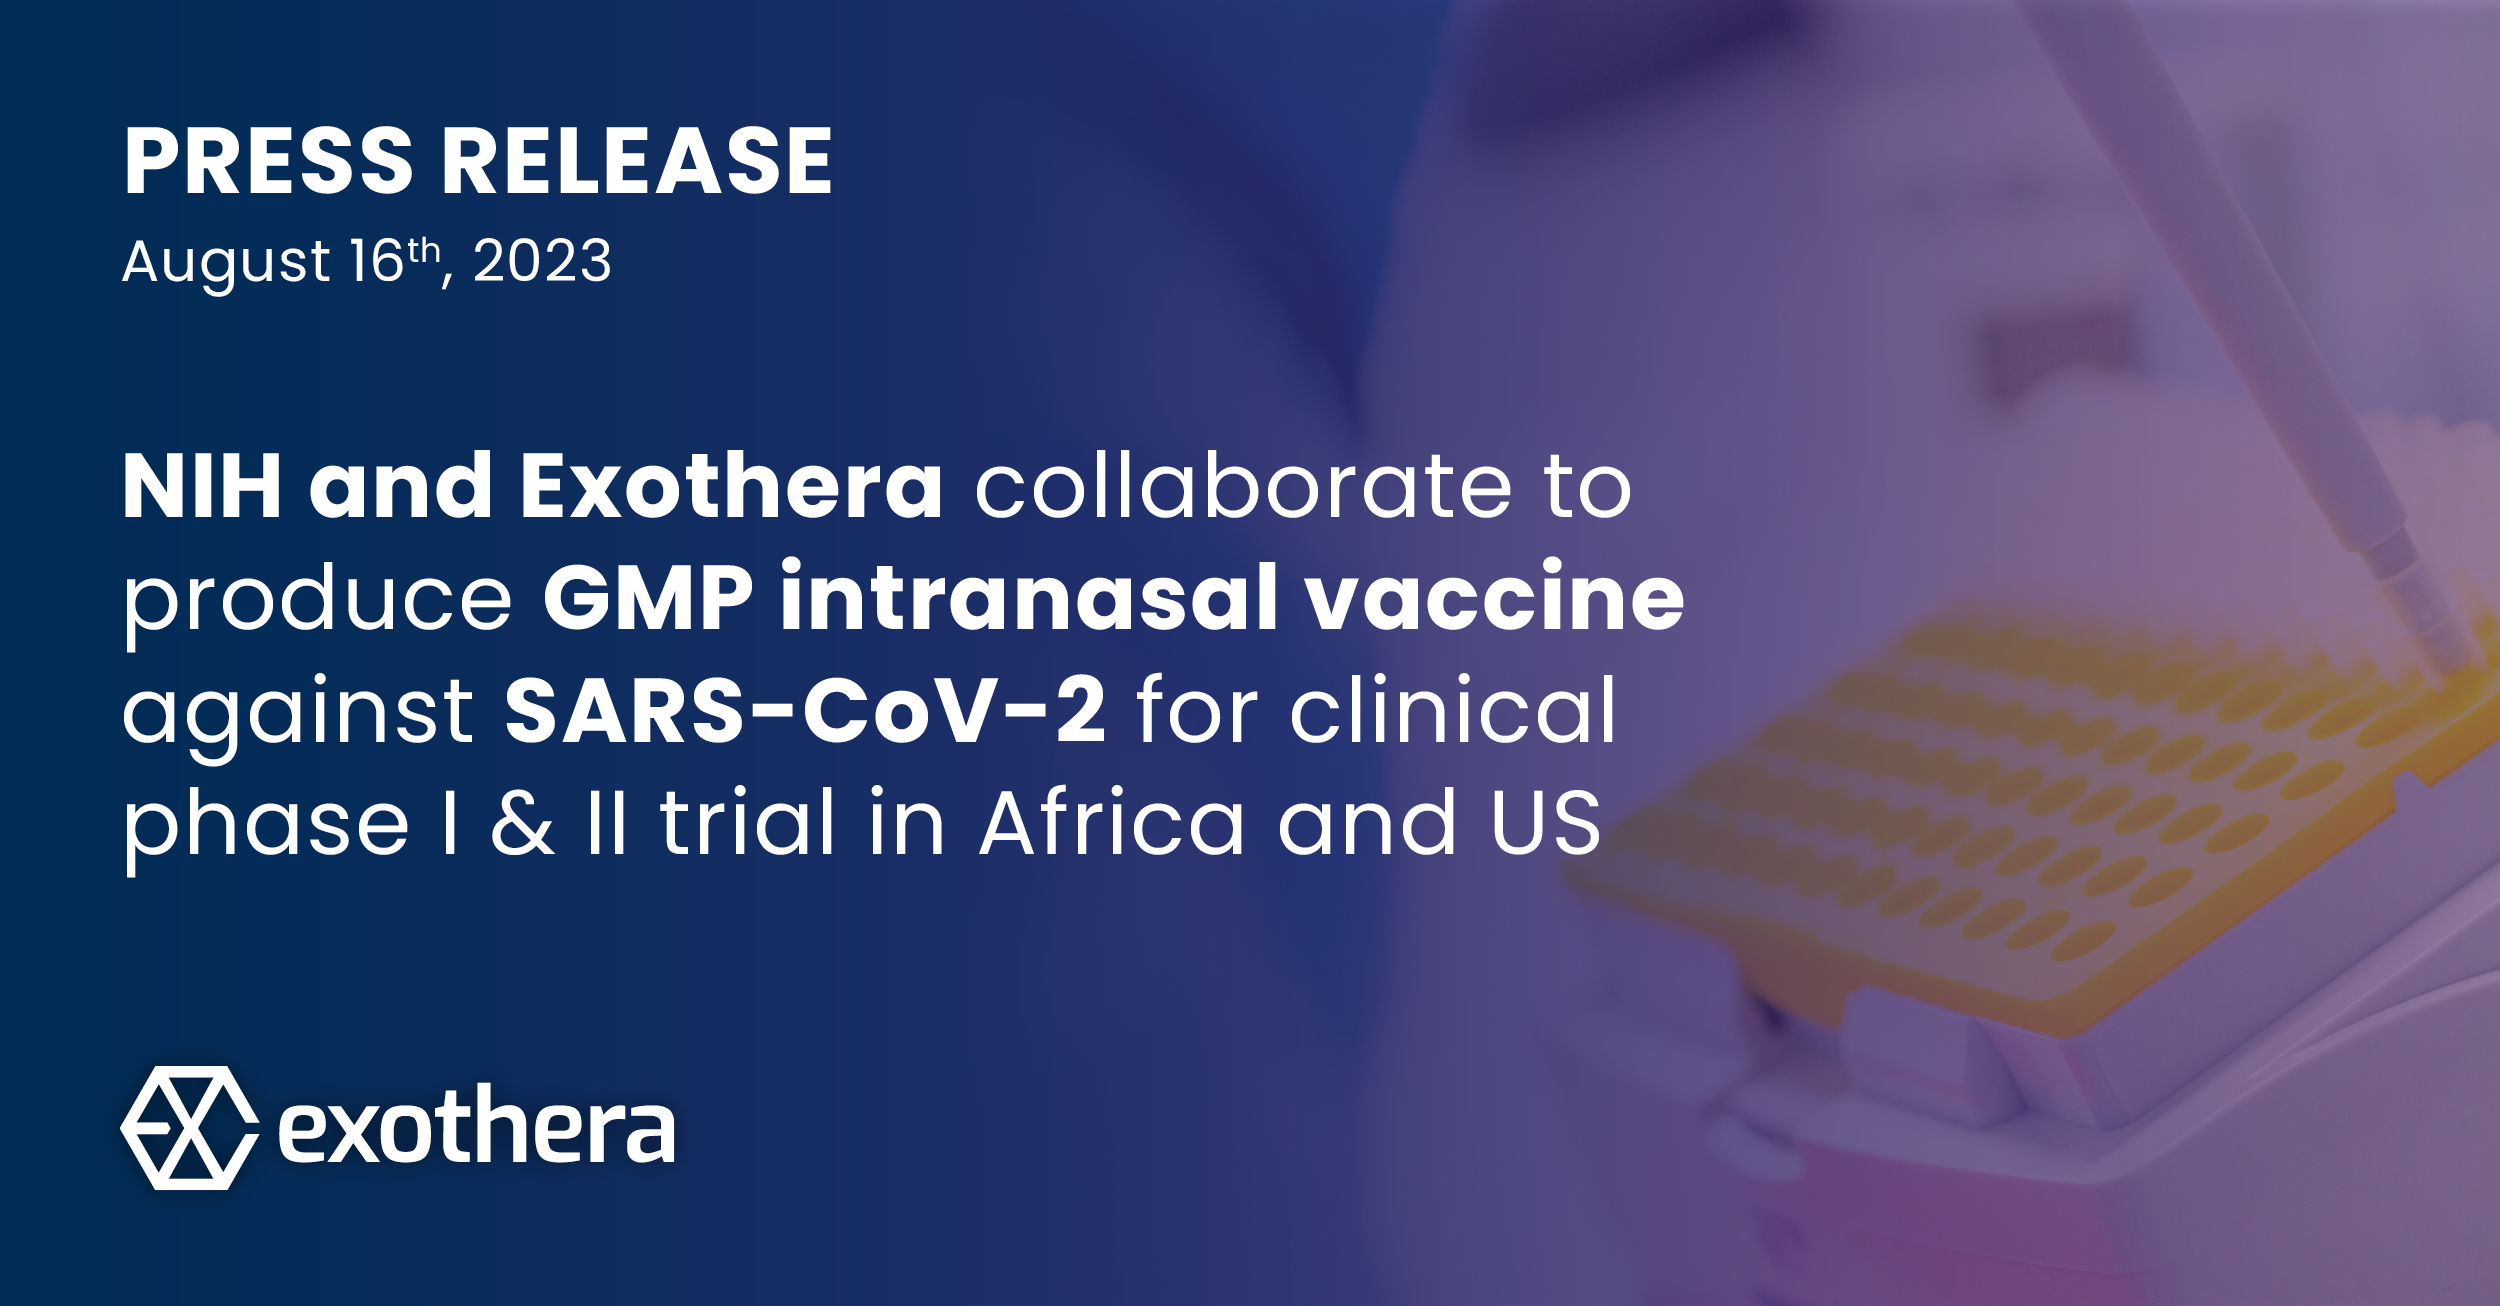 Meissa Vaccines Enters into cGMP Manufacturing Agreement for Pediatric RSV Vaccine Candidate for Phase 2 Clinical Trials